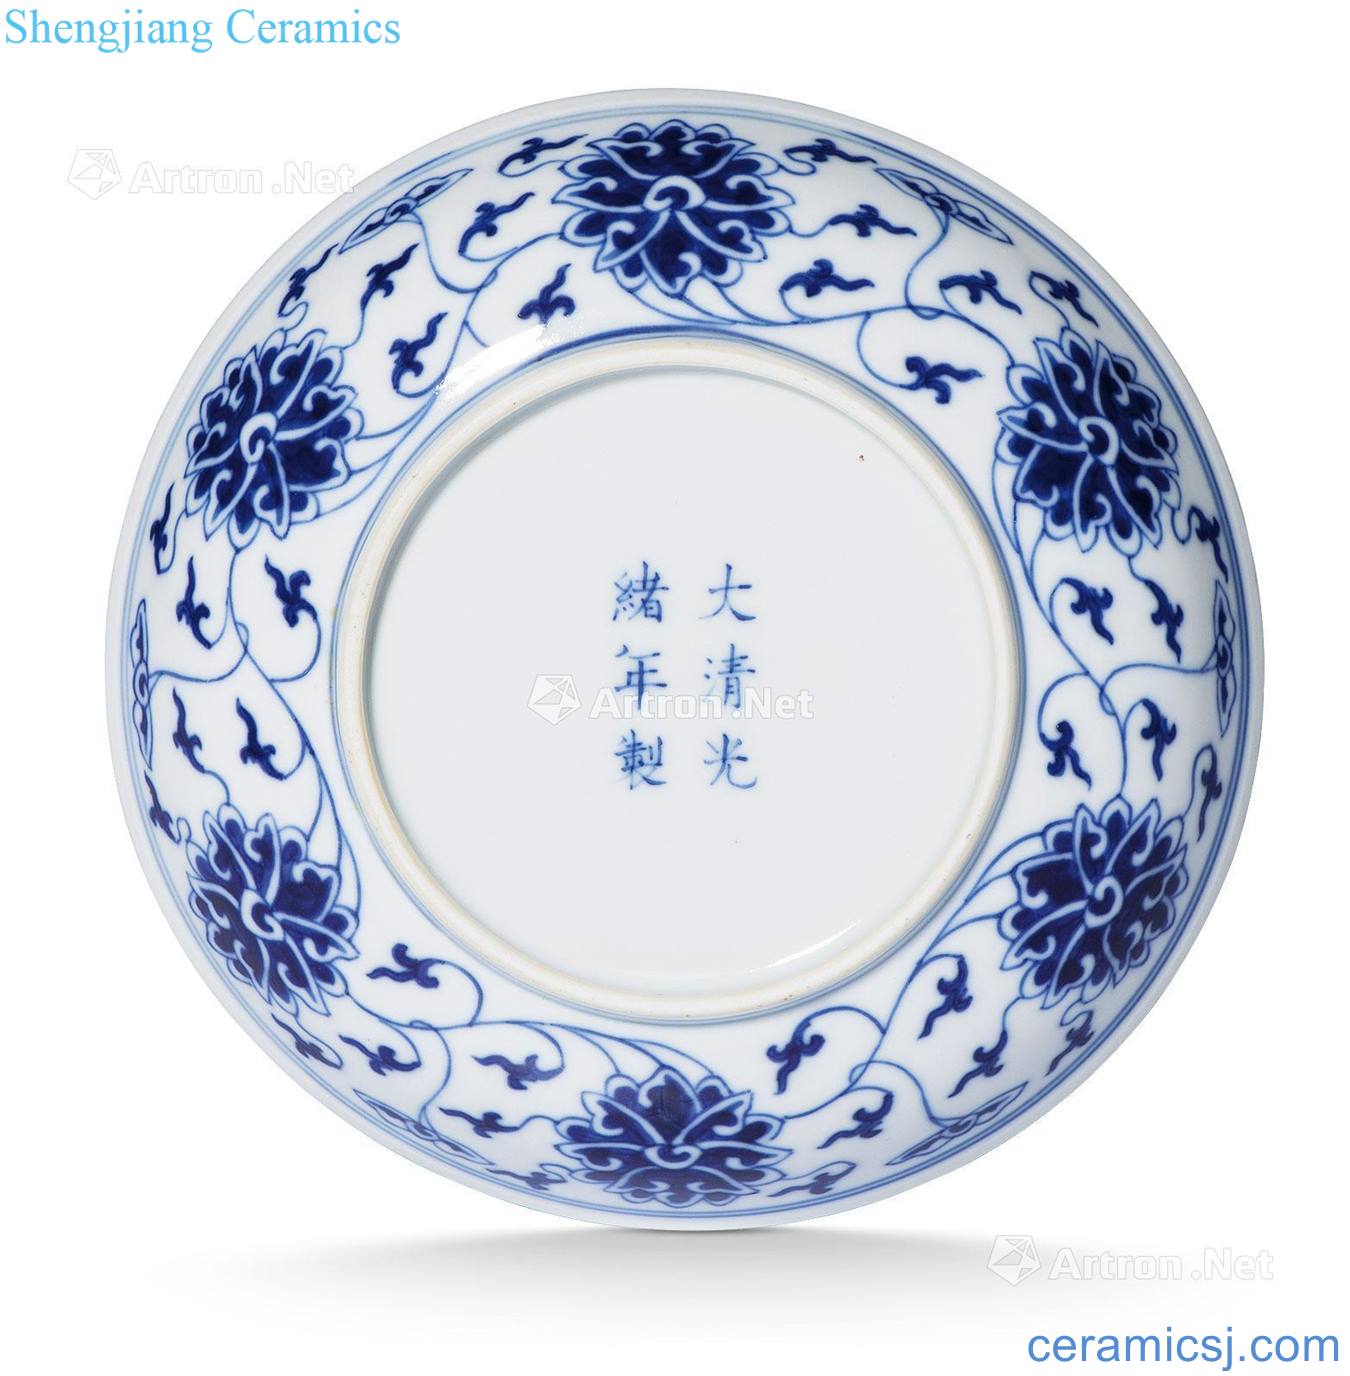 Qing guangxu Blue and white tie up lotus flower tray (four)